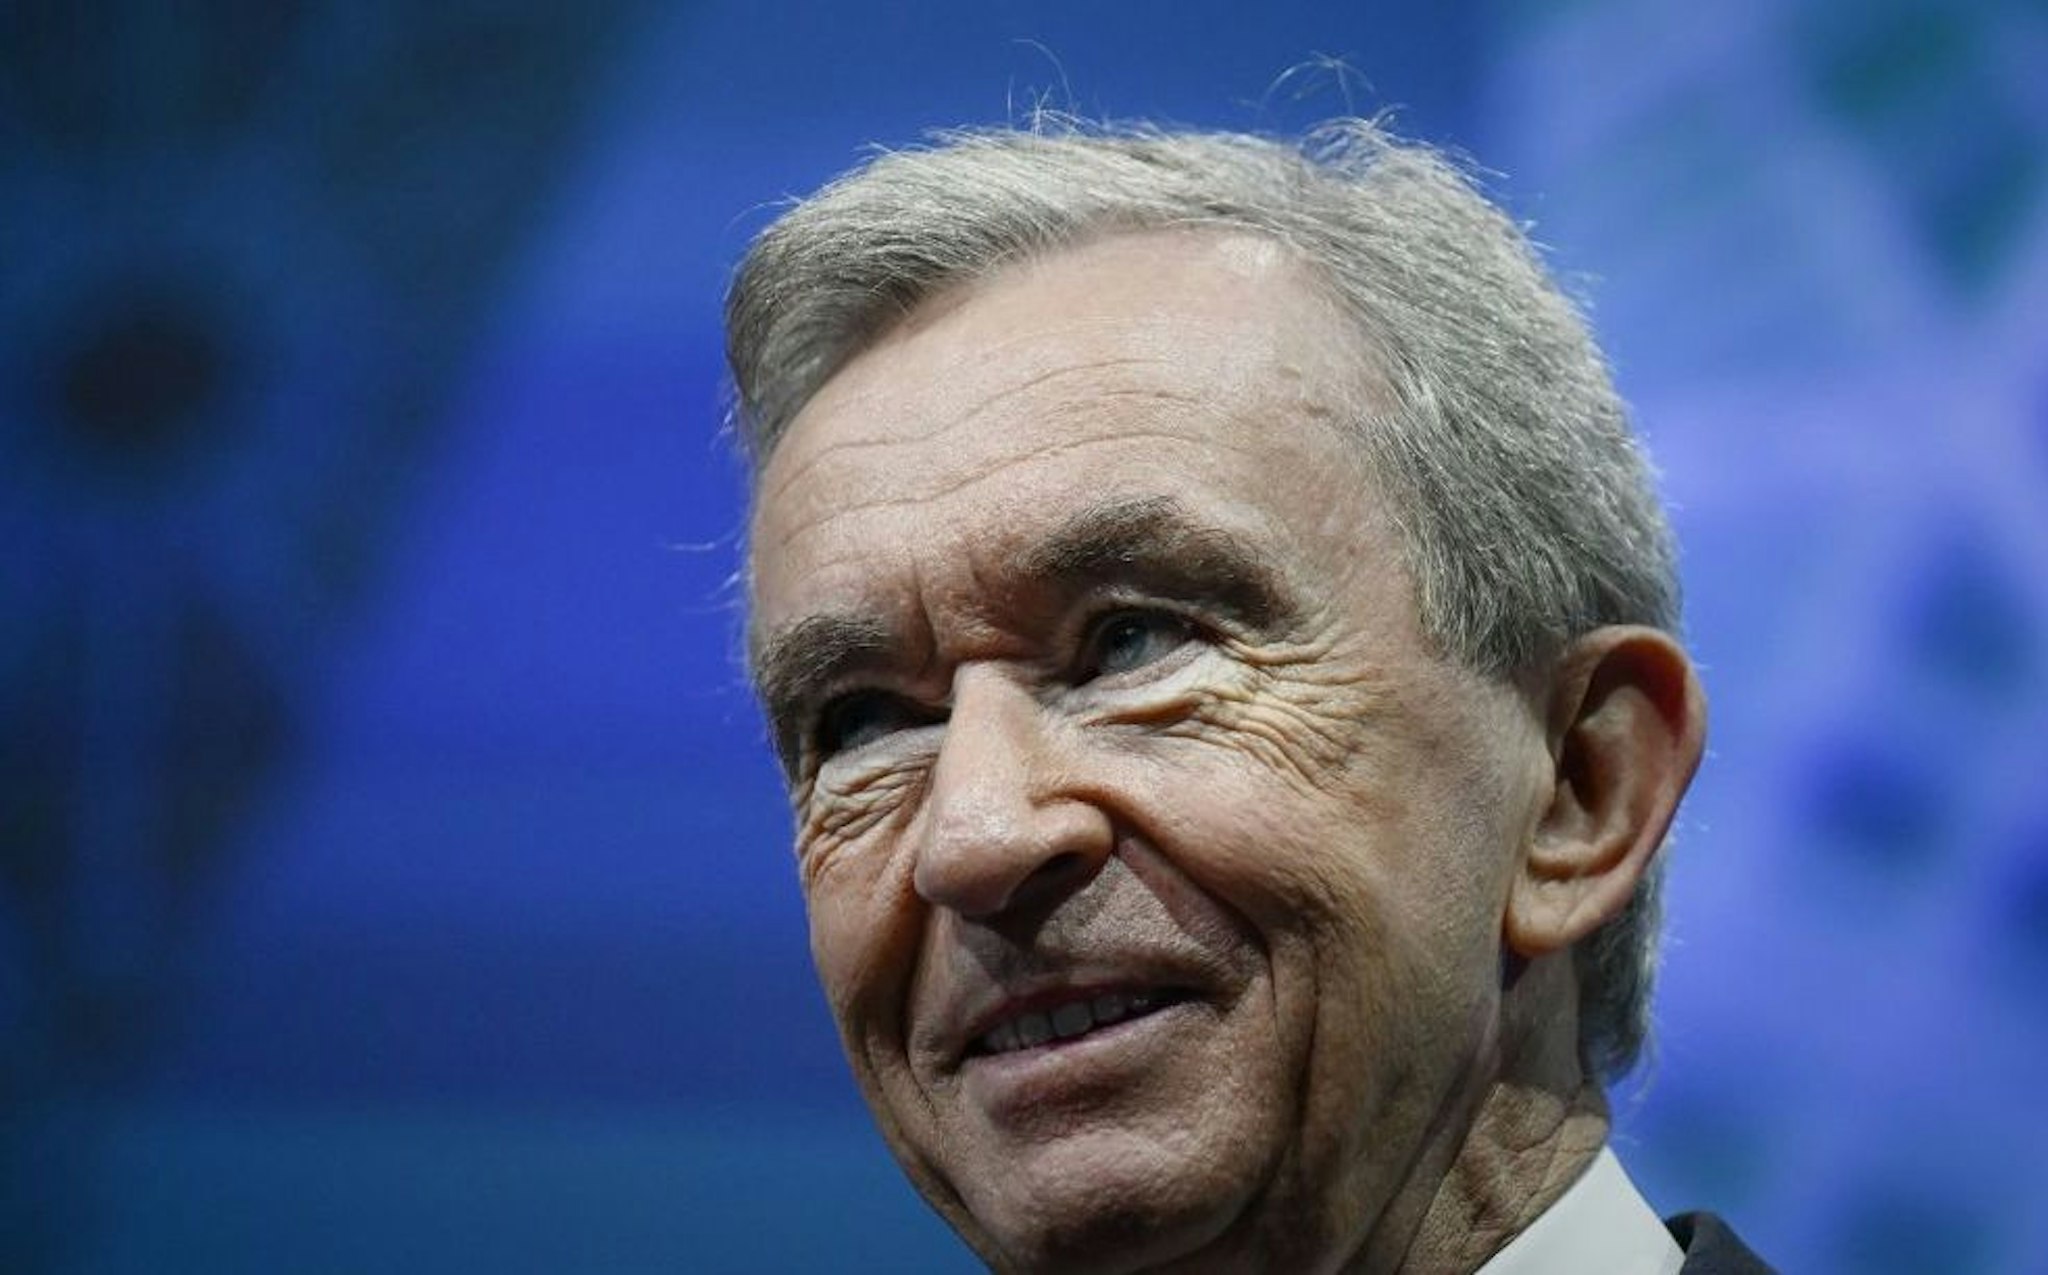 Chairman and Chief Executive of LVMH Moet Hennessy Louis Vuitton SE, Bernard Arnault, attends the LVMH Innovation awards at the CEO forum during the Vivatech startups and innovation fair, in Paris on May 17, 2019.